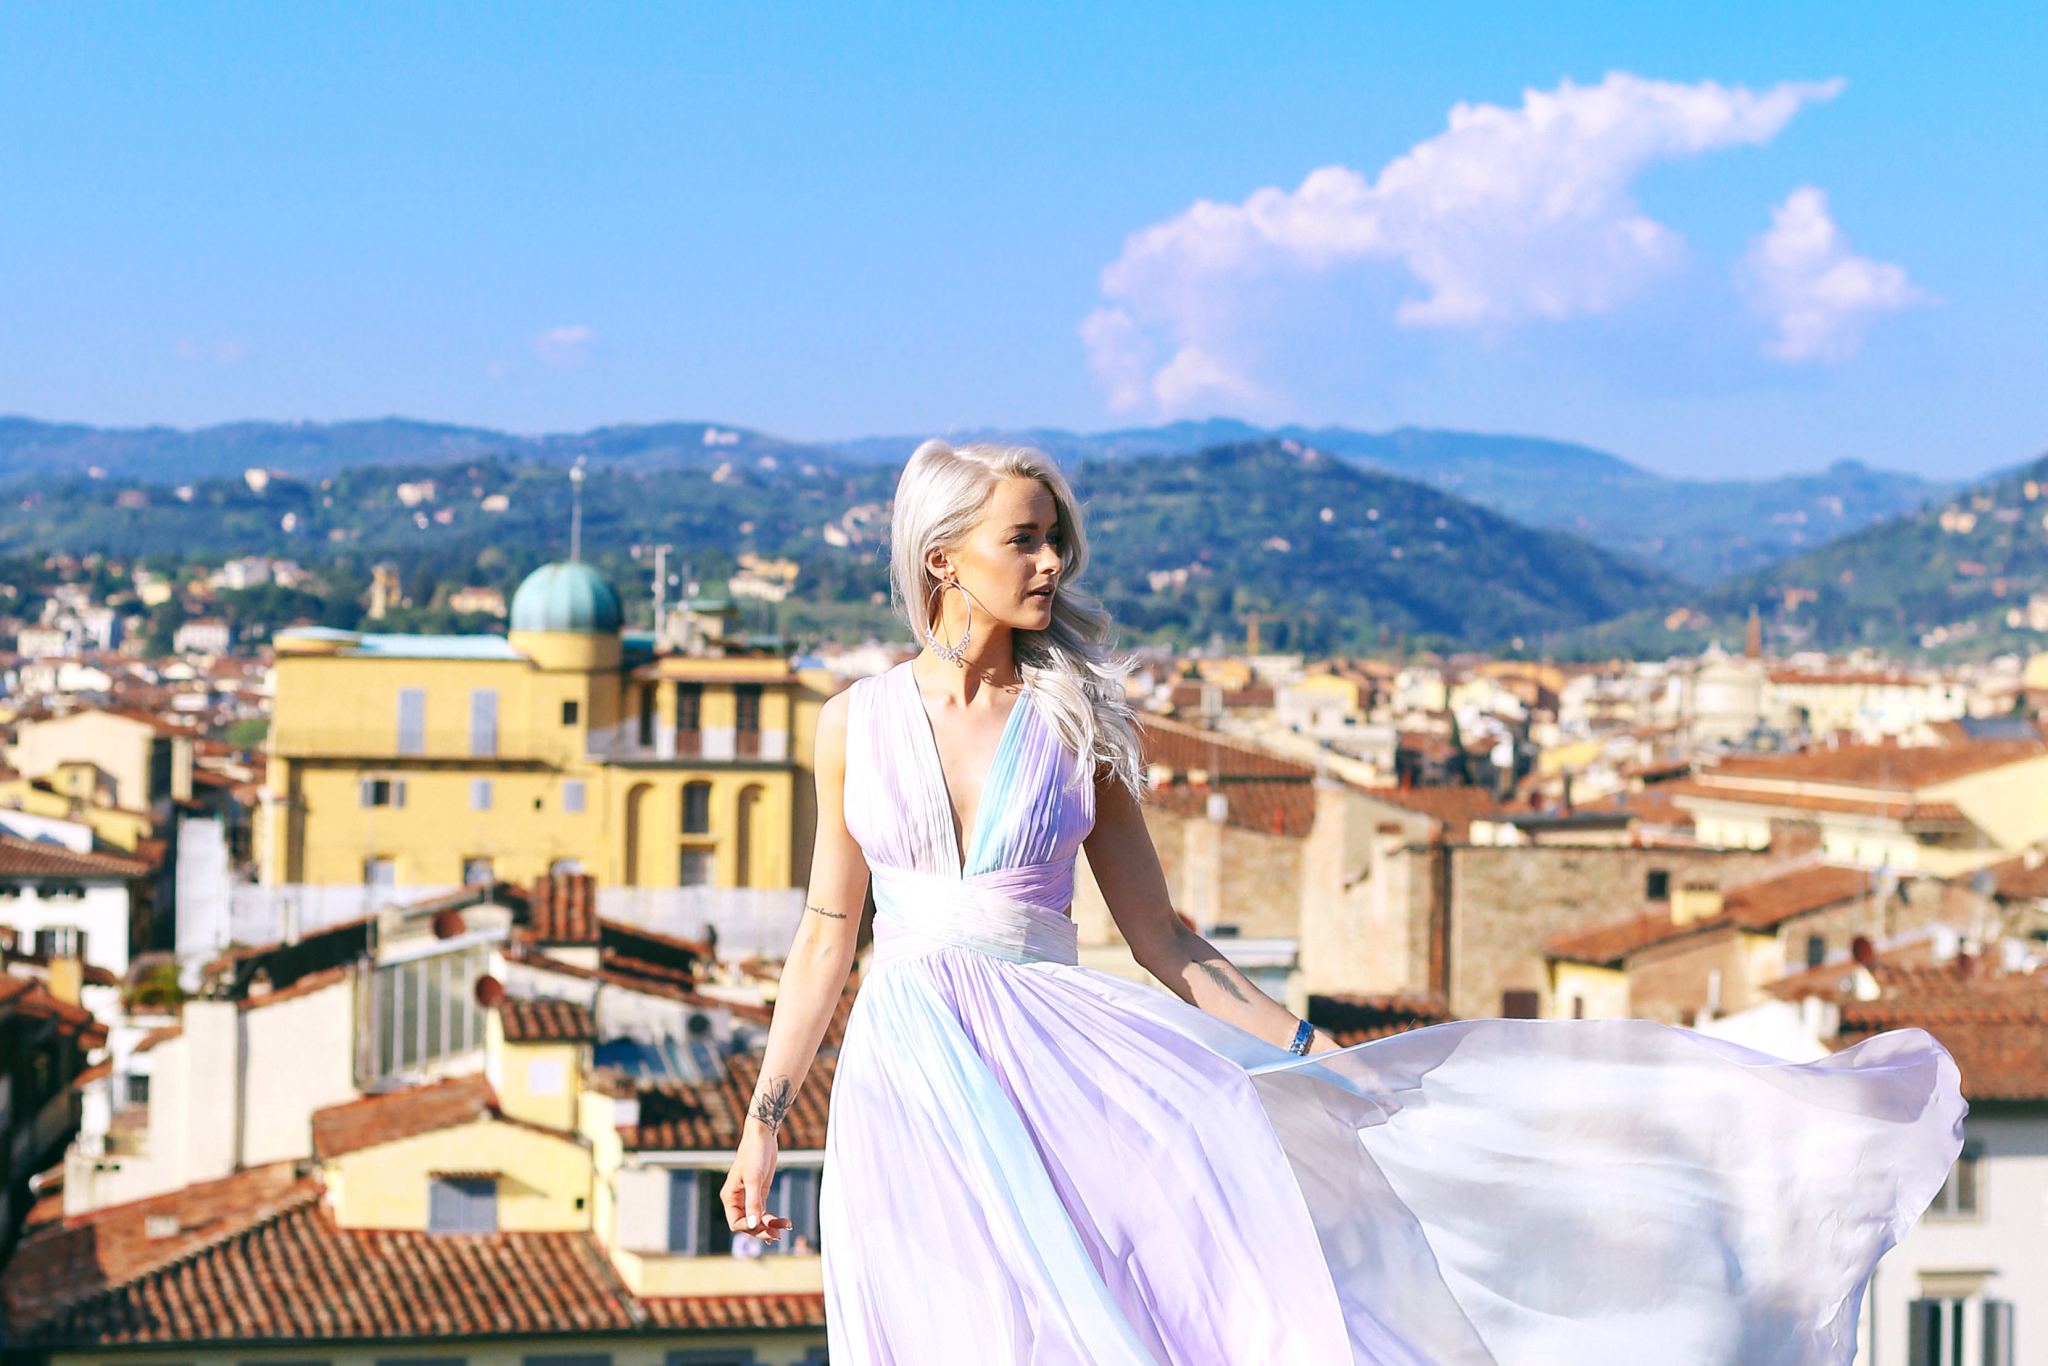 9 Reasons You Need To Travel More - Inthefrow